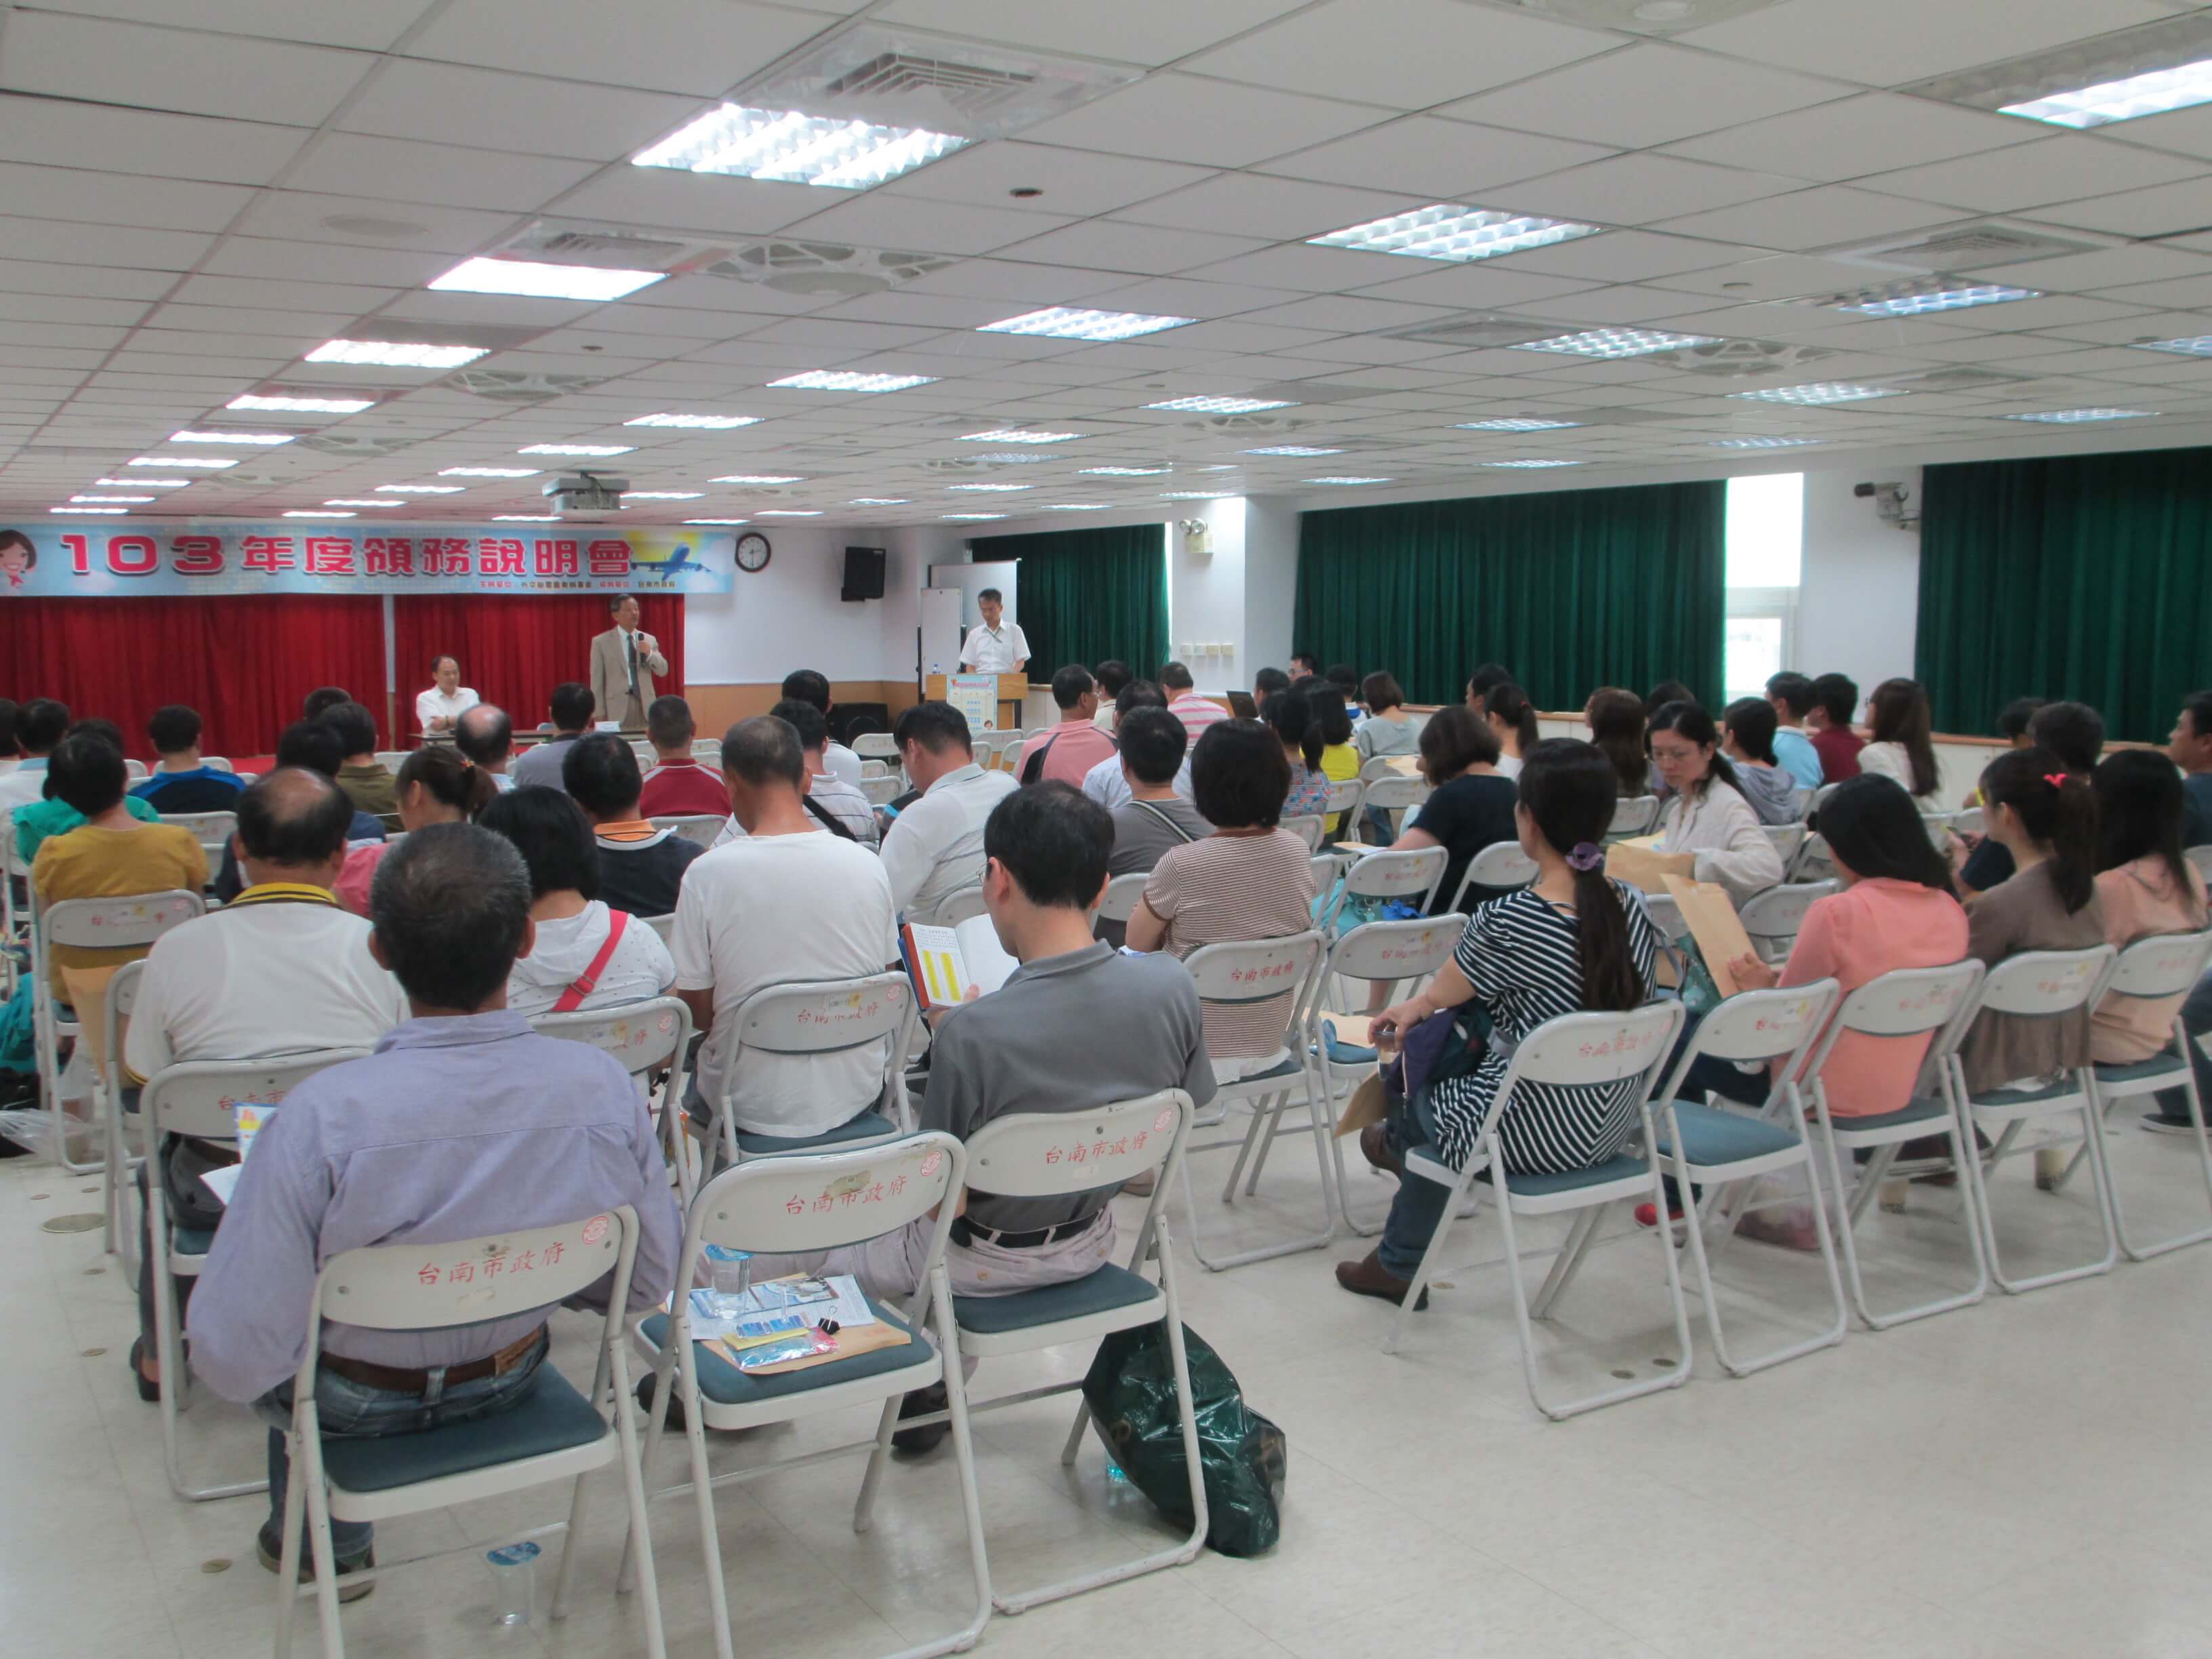 Southwestern Taiwan Office, MOFA Held a Consular Affairs Briefing for Local Community in Tainan City on September 16, 2014